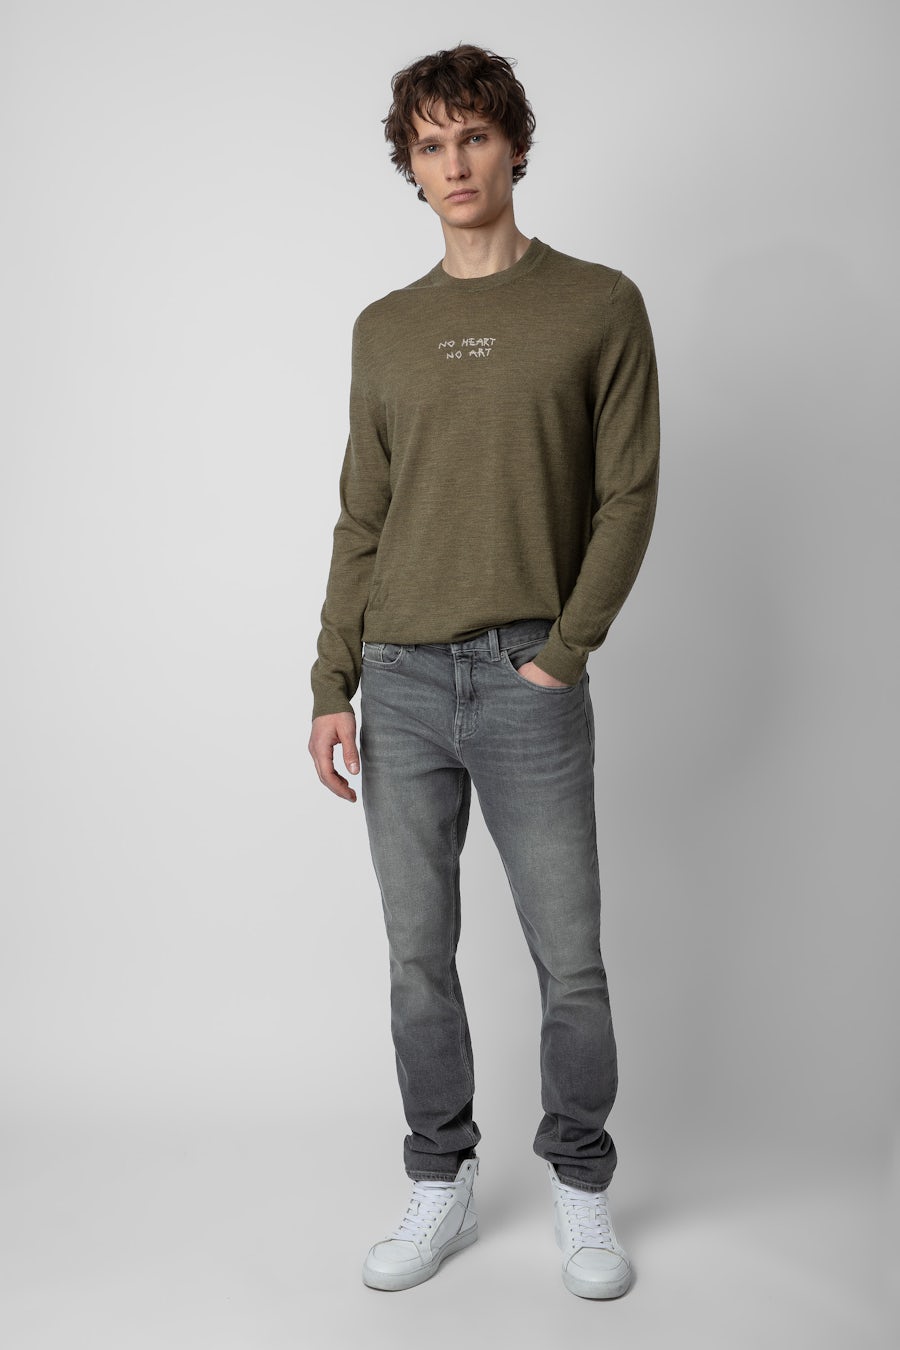 Men’s luxury and trendy jumpers, cardigans and knit sweatshirts | Zadig ...